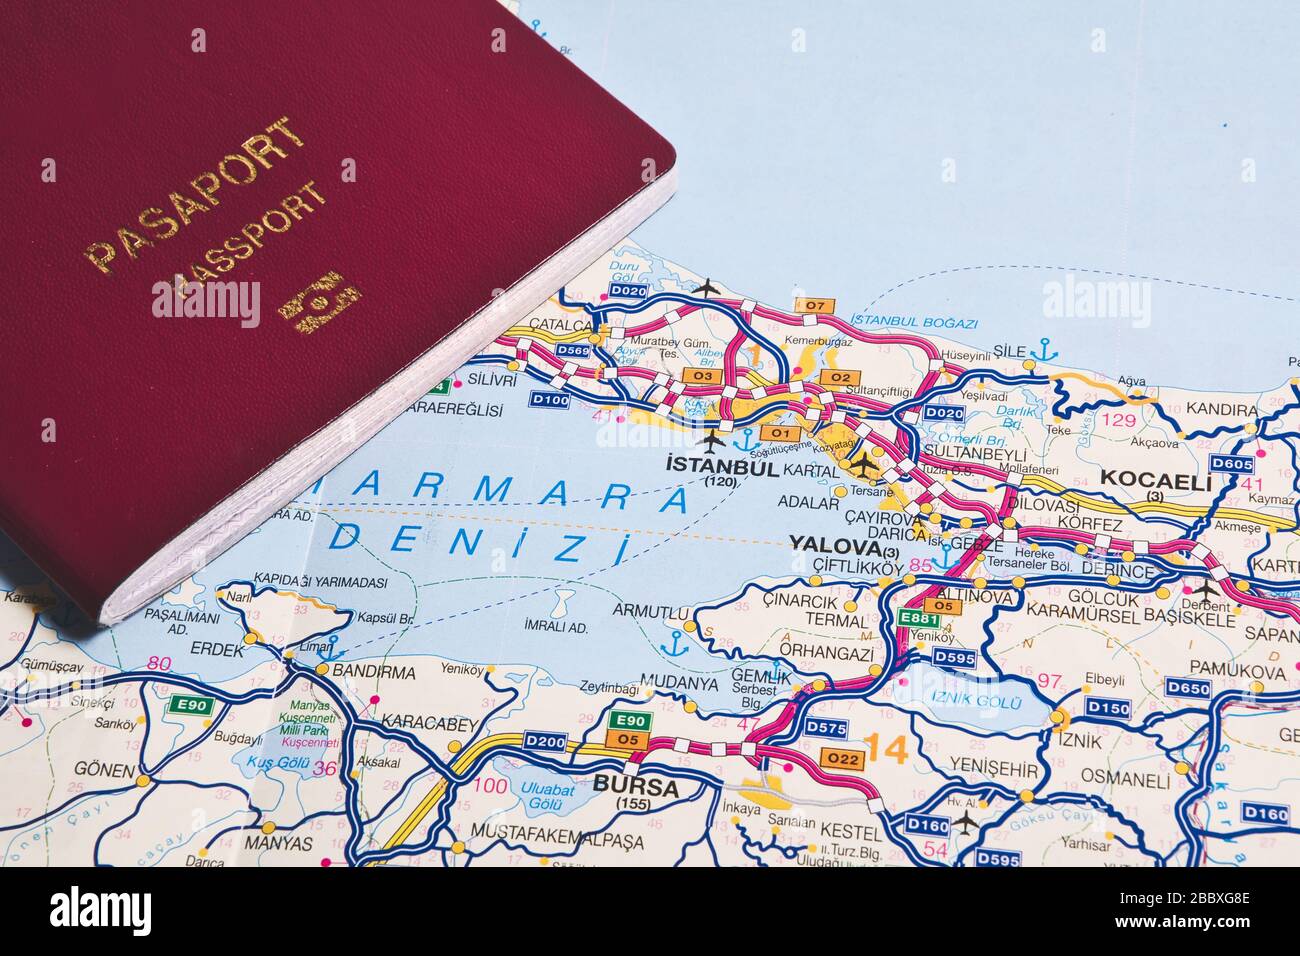 Travel to Istanbul or travel to Turkey concept idea photo, claret red passport on Istanbul, Turkey map Stock Photo